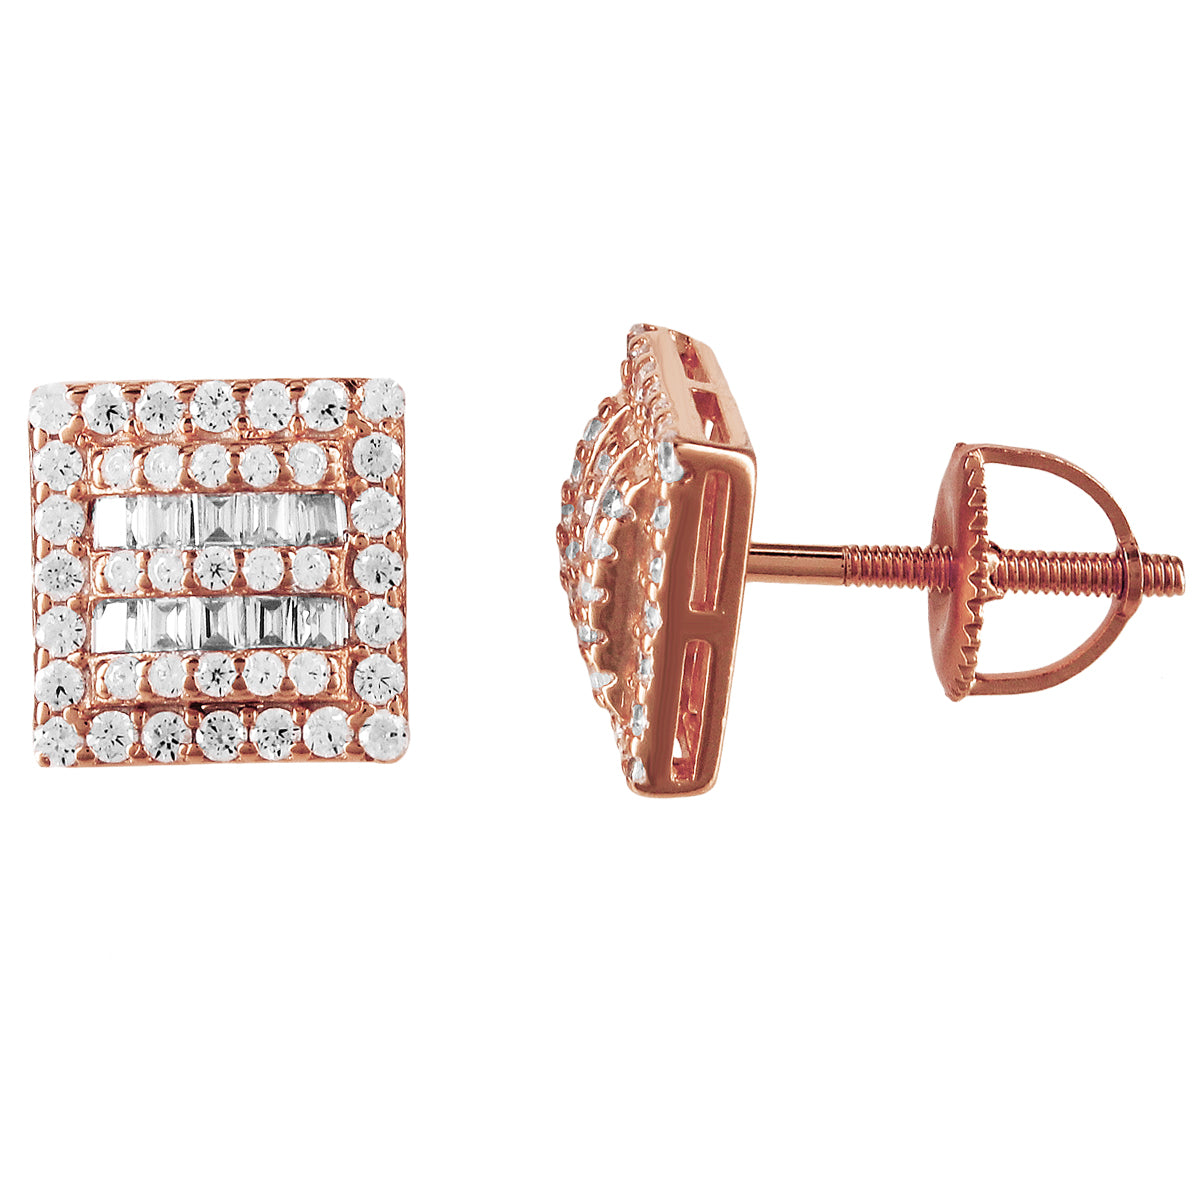 Square shape Icy Micro Pave Rose Gold Tone .925 Earrings